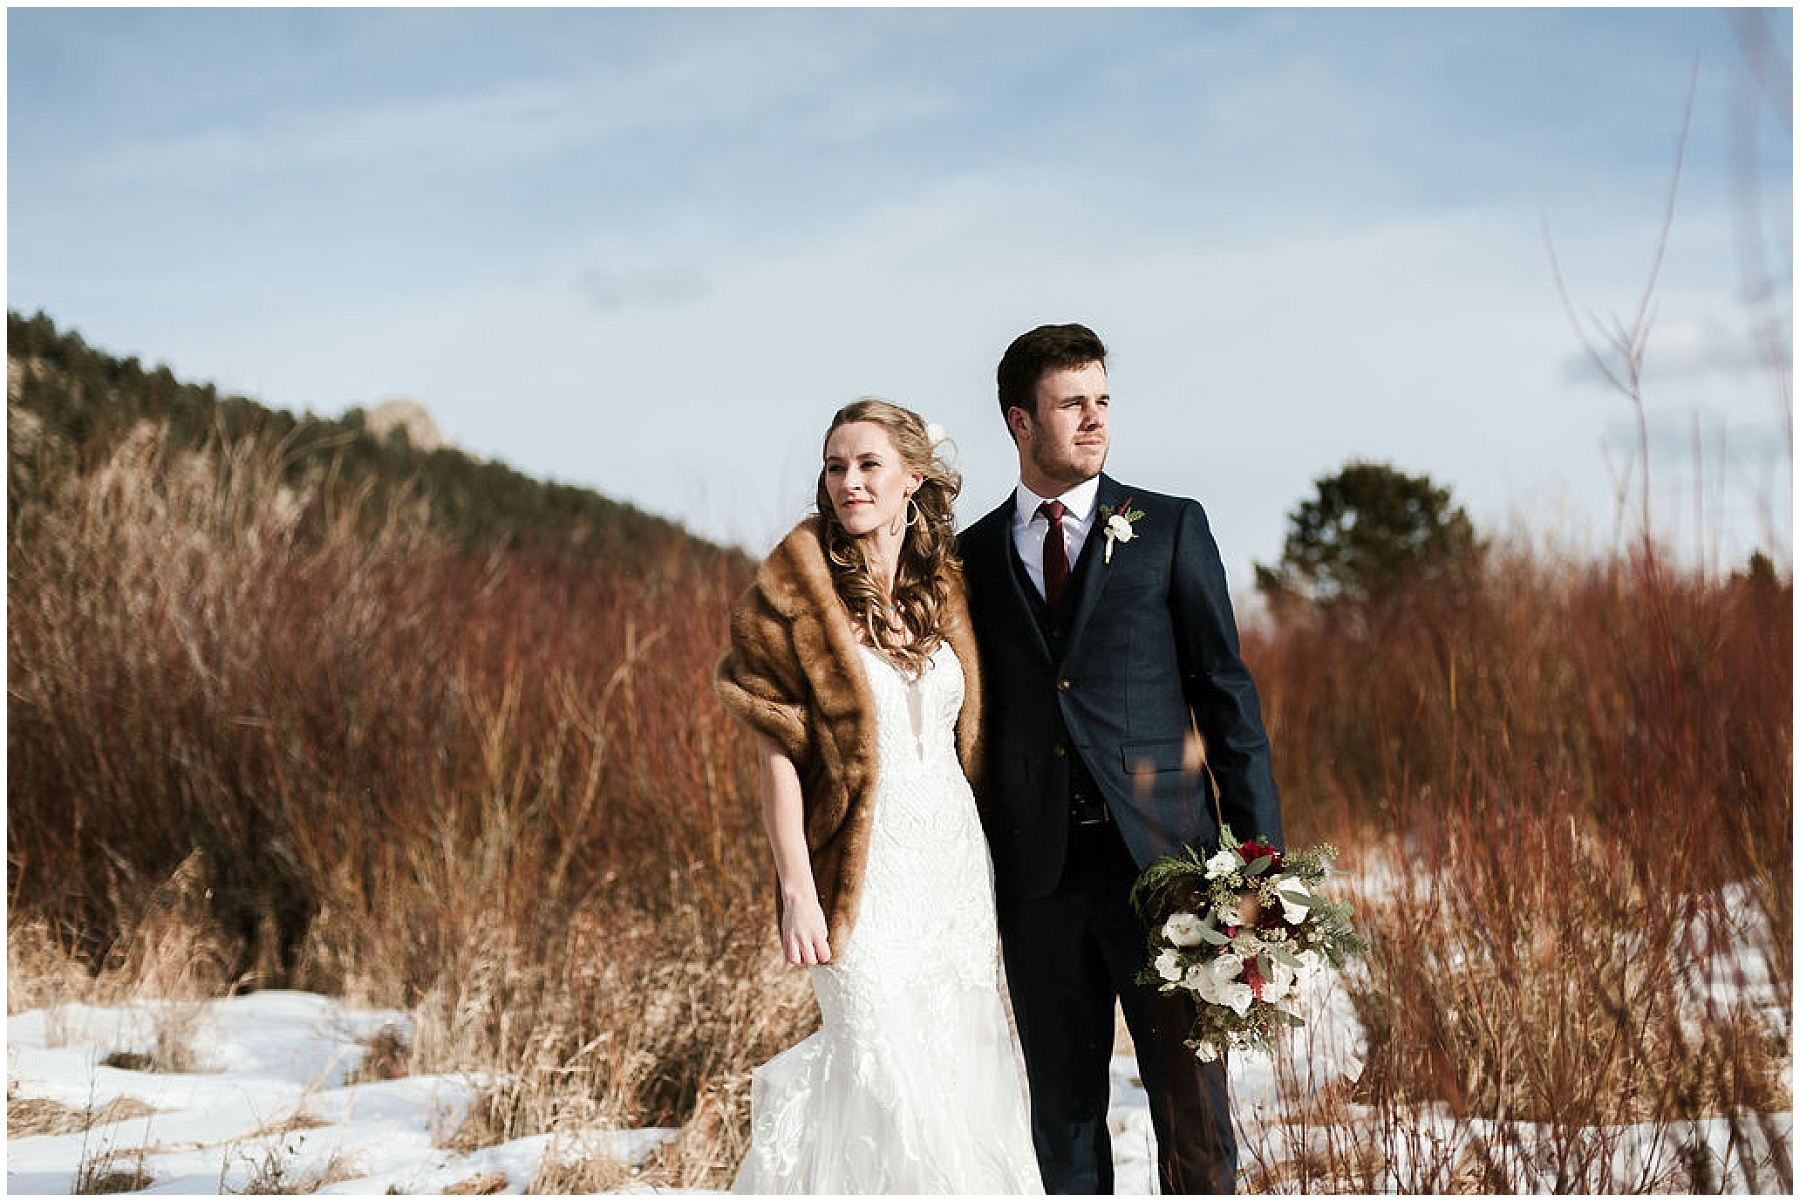 Katesalleyphotography-166_Haley and Dan get married in Estes Park.jpg